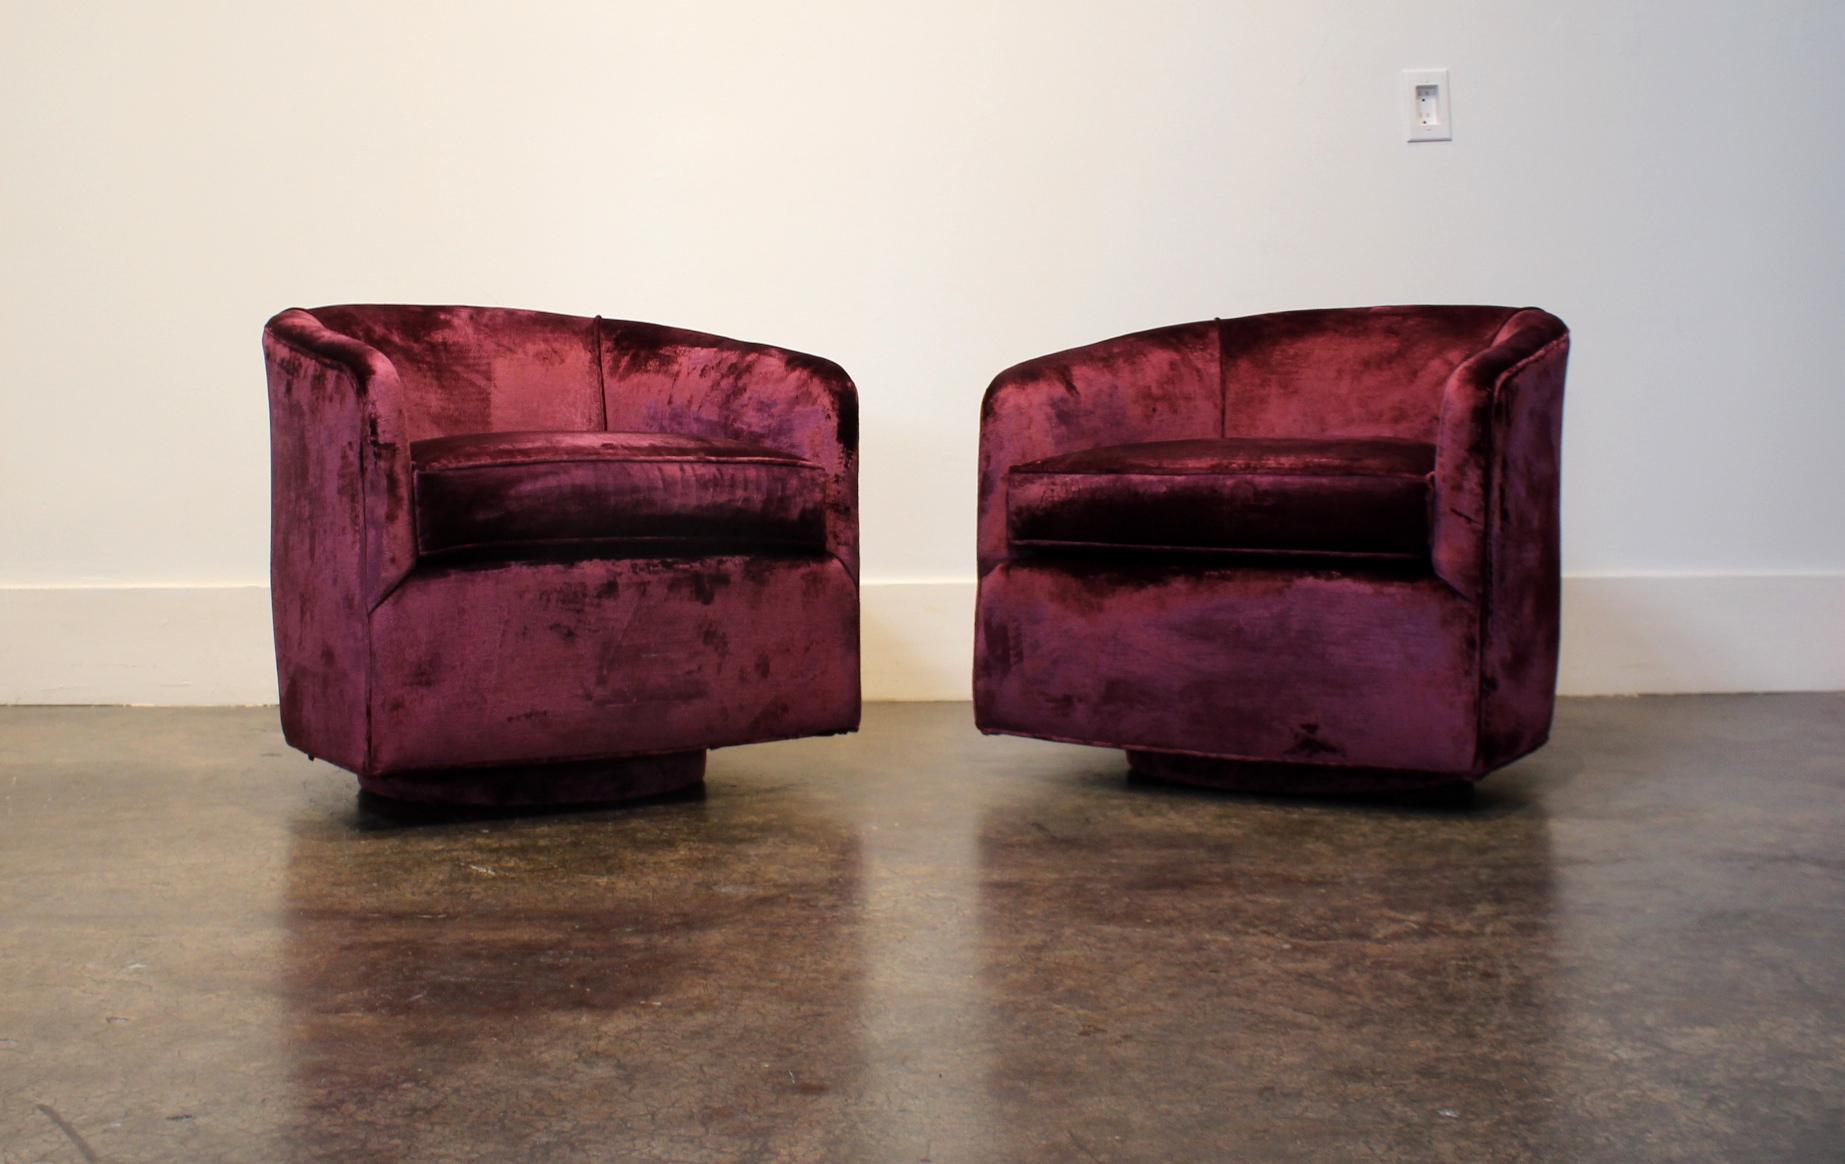 Pair of vintage Baughman-style swivel club chairs in purple/burgundy velvet. Chairs are from 1970s-1980s and are sturdy and function smoothly. Upholstery is recent and in good condition.